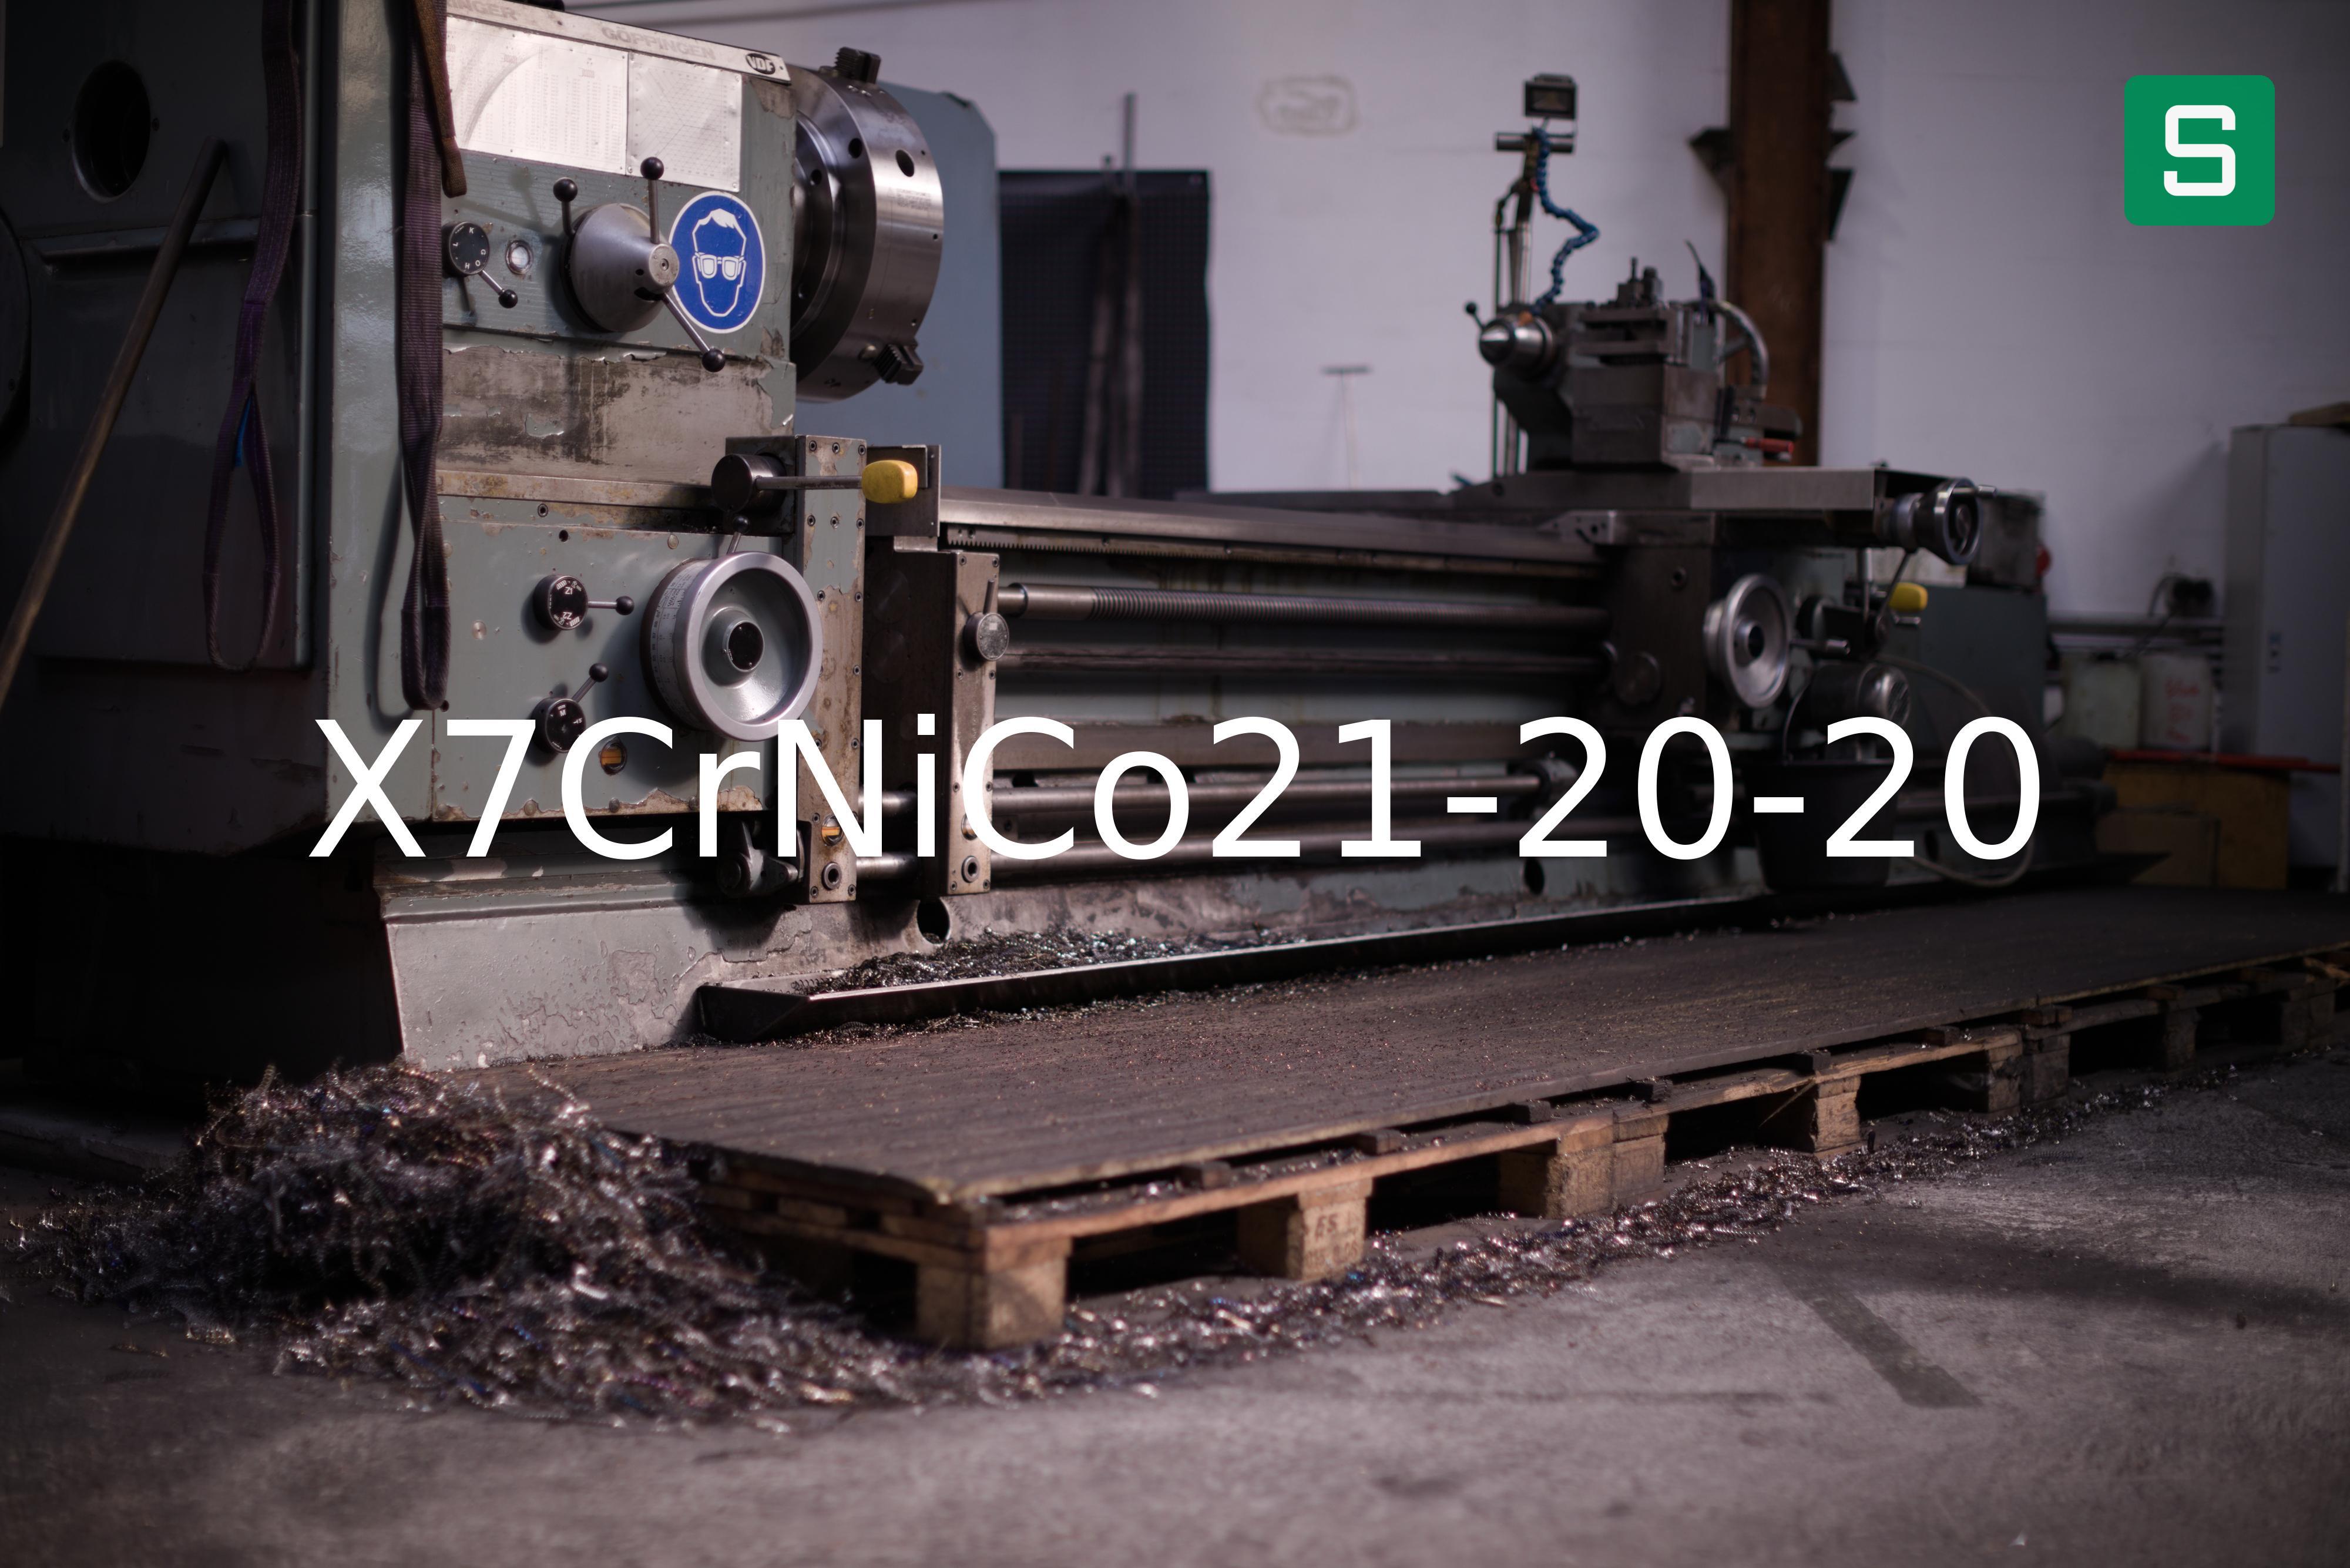 Steel Material: X7CrNiCo21-20-20